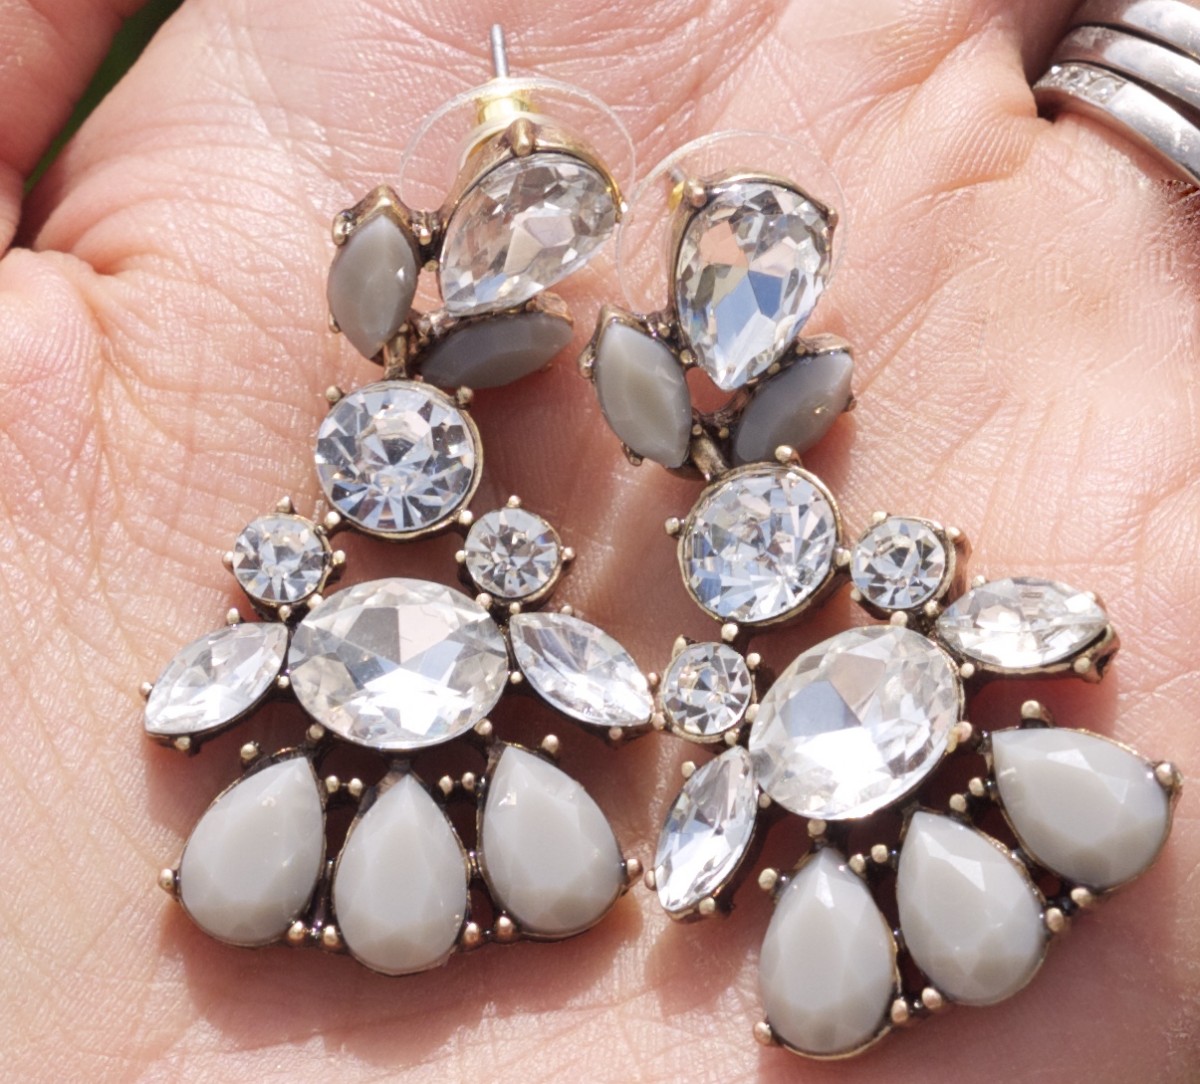 What I Wore: Betty and Biddy 'Alberta' Earrings: €16